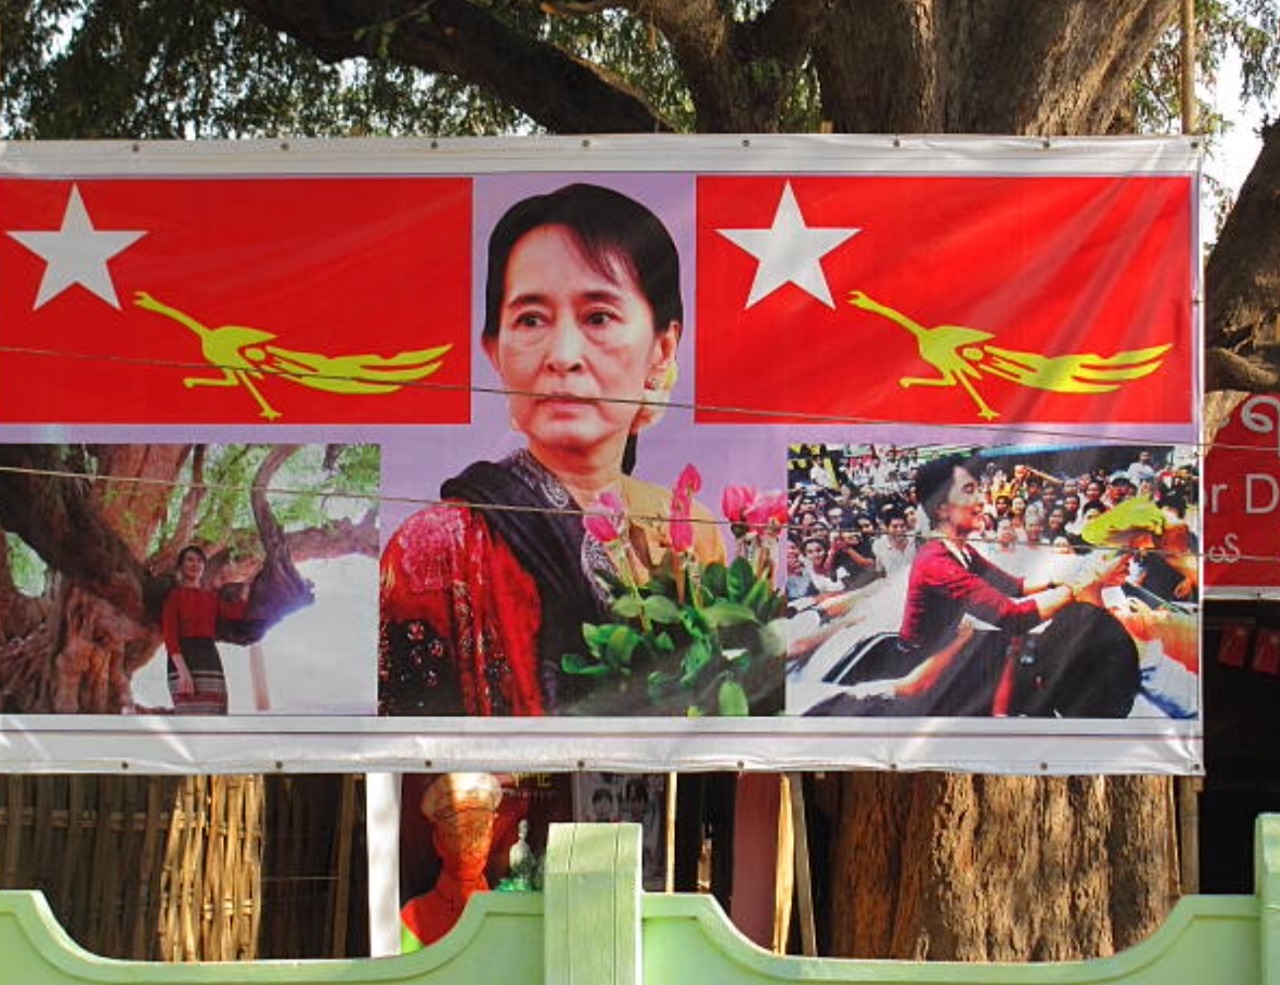 File photo showing an campaign poster for Aung San Suu Kyi in the 2012 election.